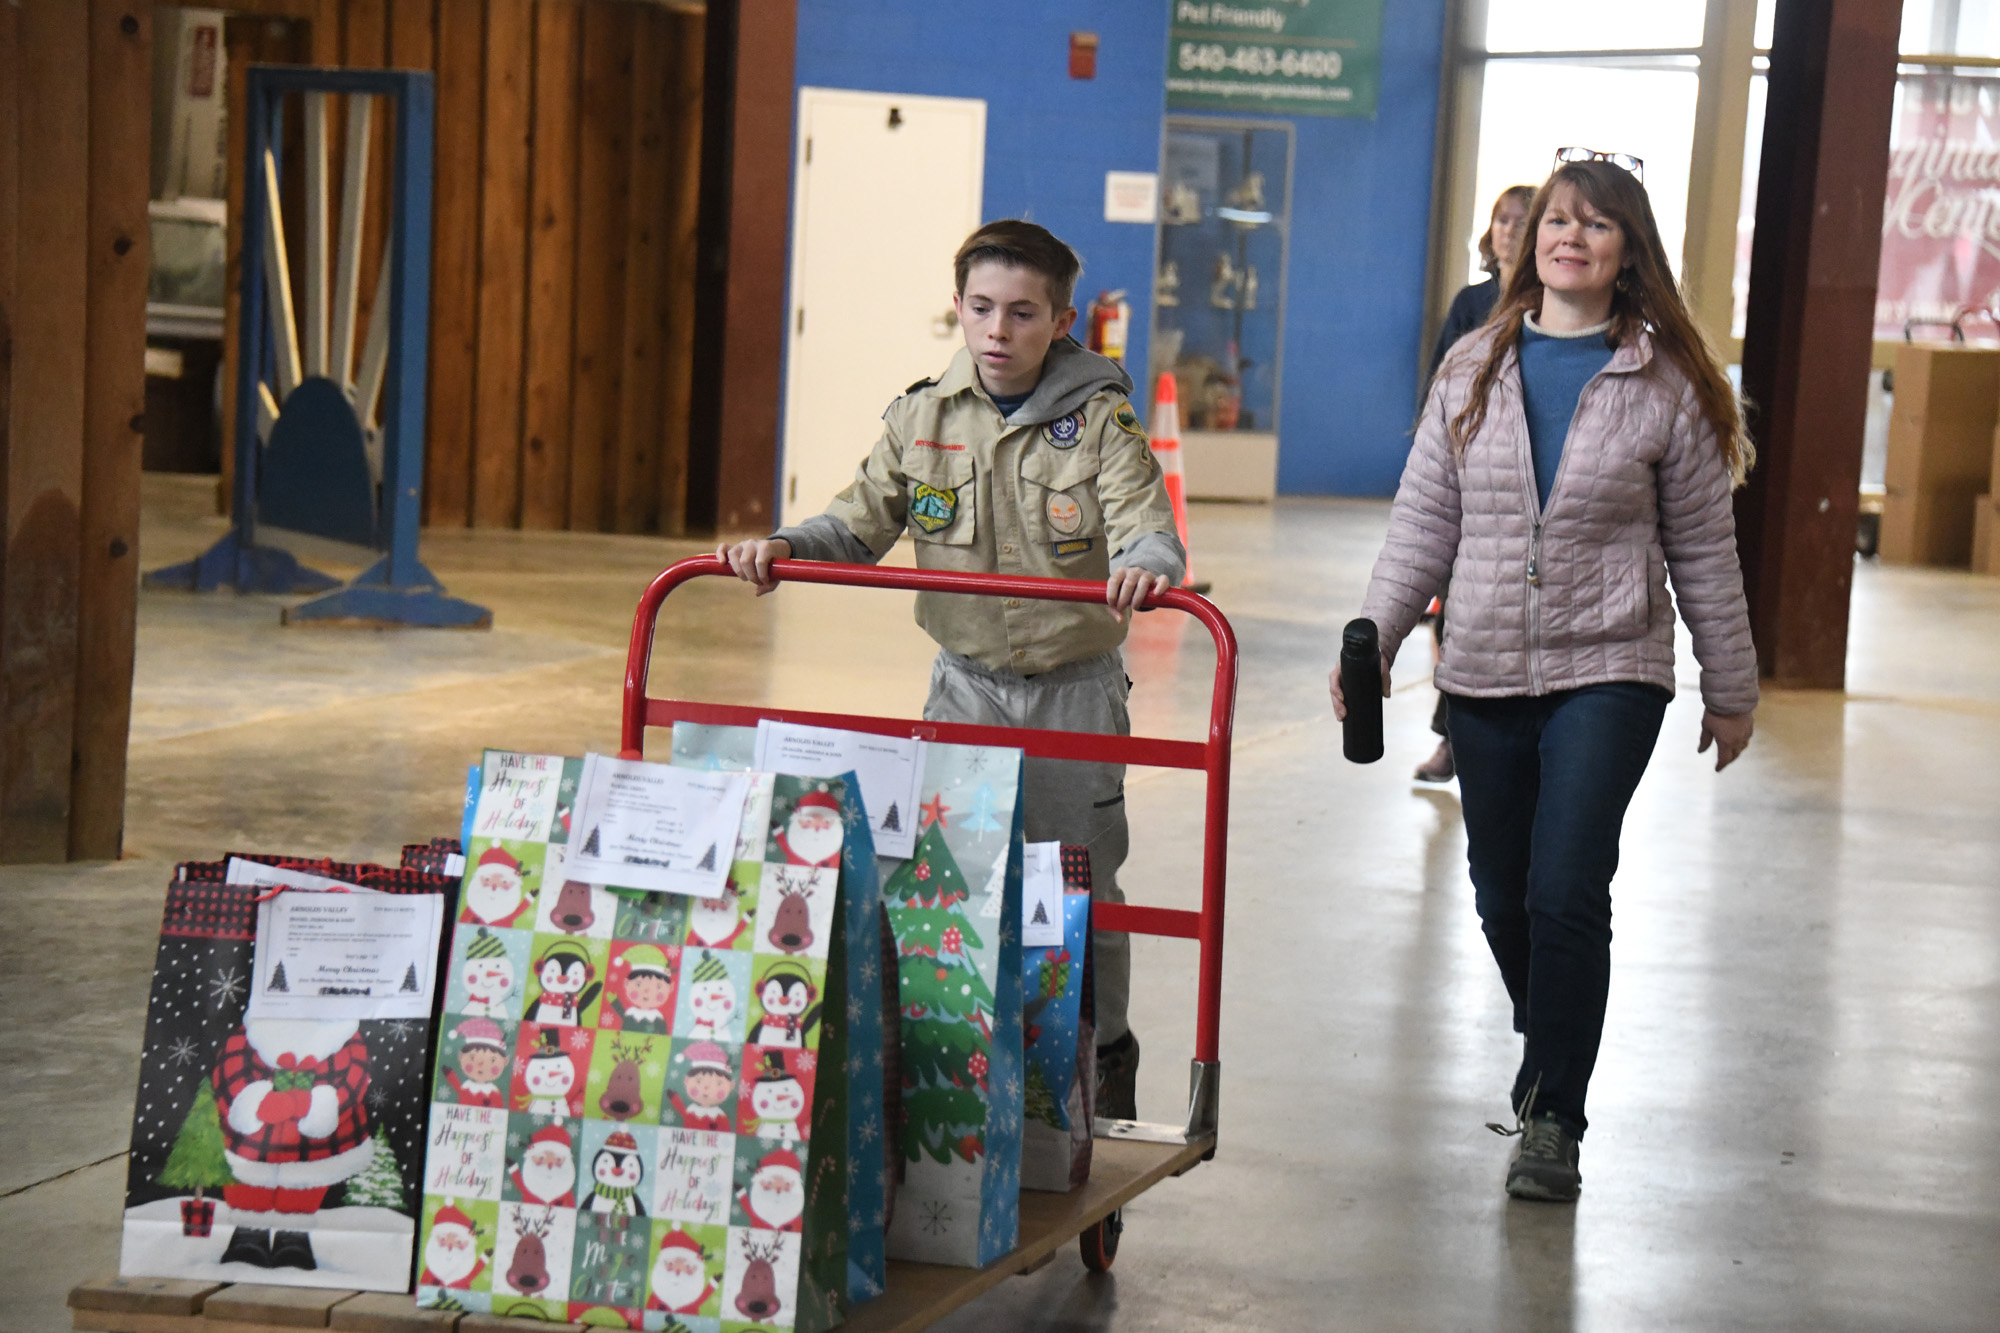 Tina Miller walking behind a boy scout pushing a cart loaded with brightly colored Christmas gift bags full of toys.